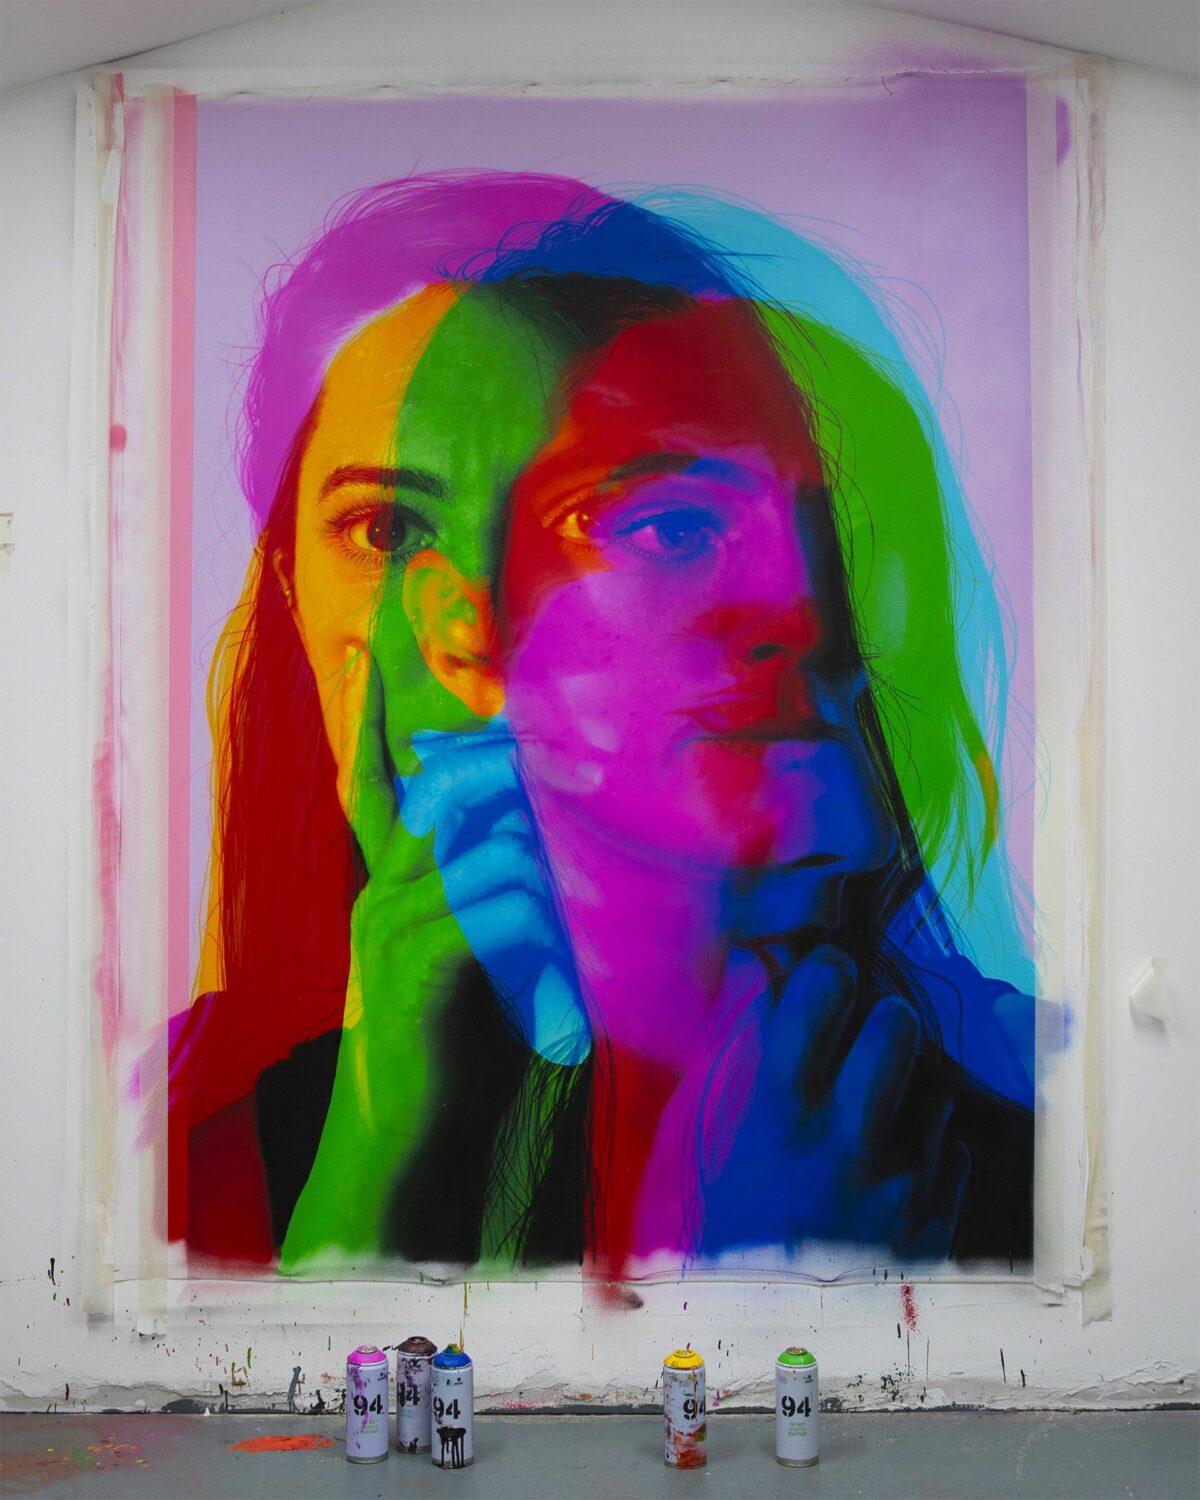 Incredible Large Scale Figurative Murals With Rgb Aesthetic By Aches 14